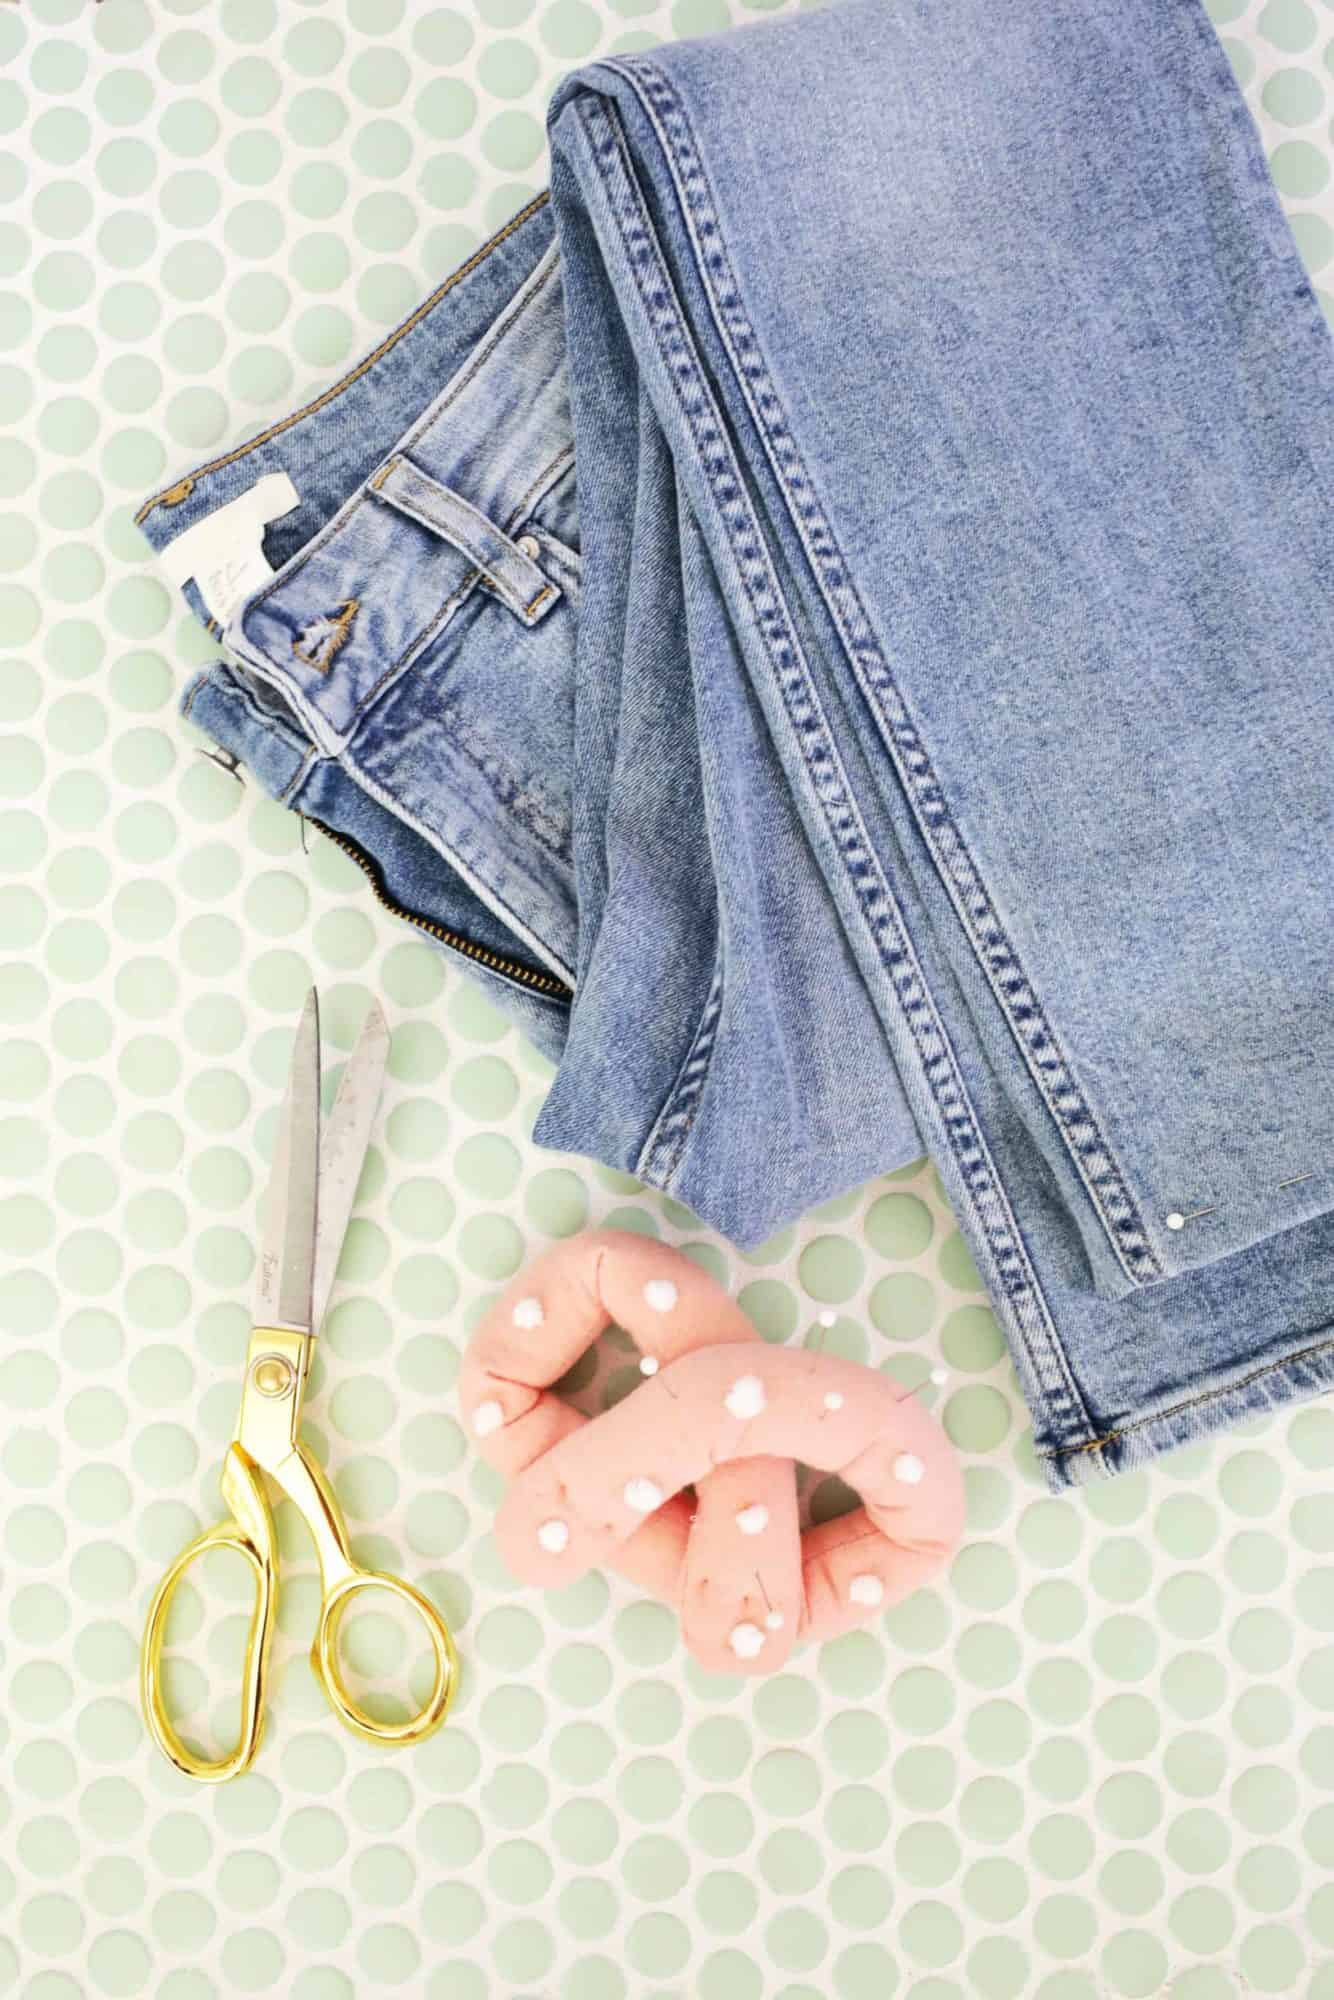 How to Hem Your Jeans (in 4 Easy Steps!) - A Beautiful Mess